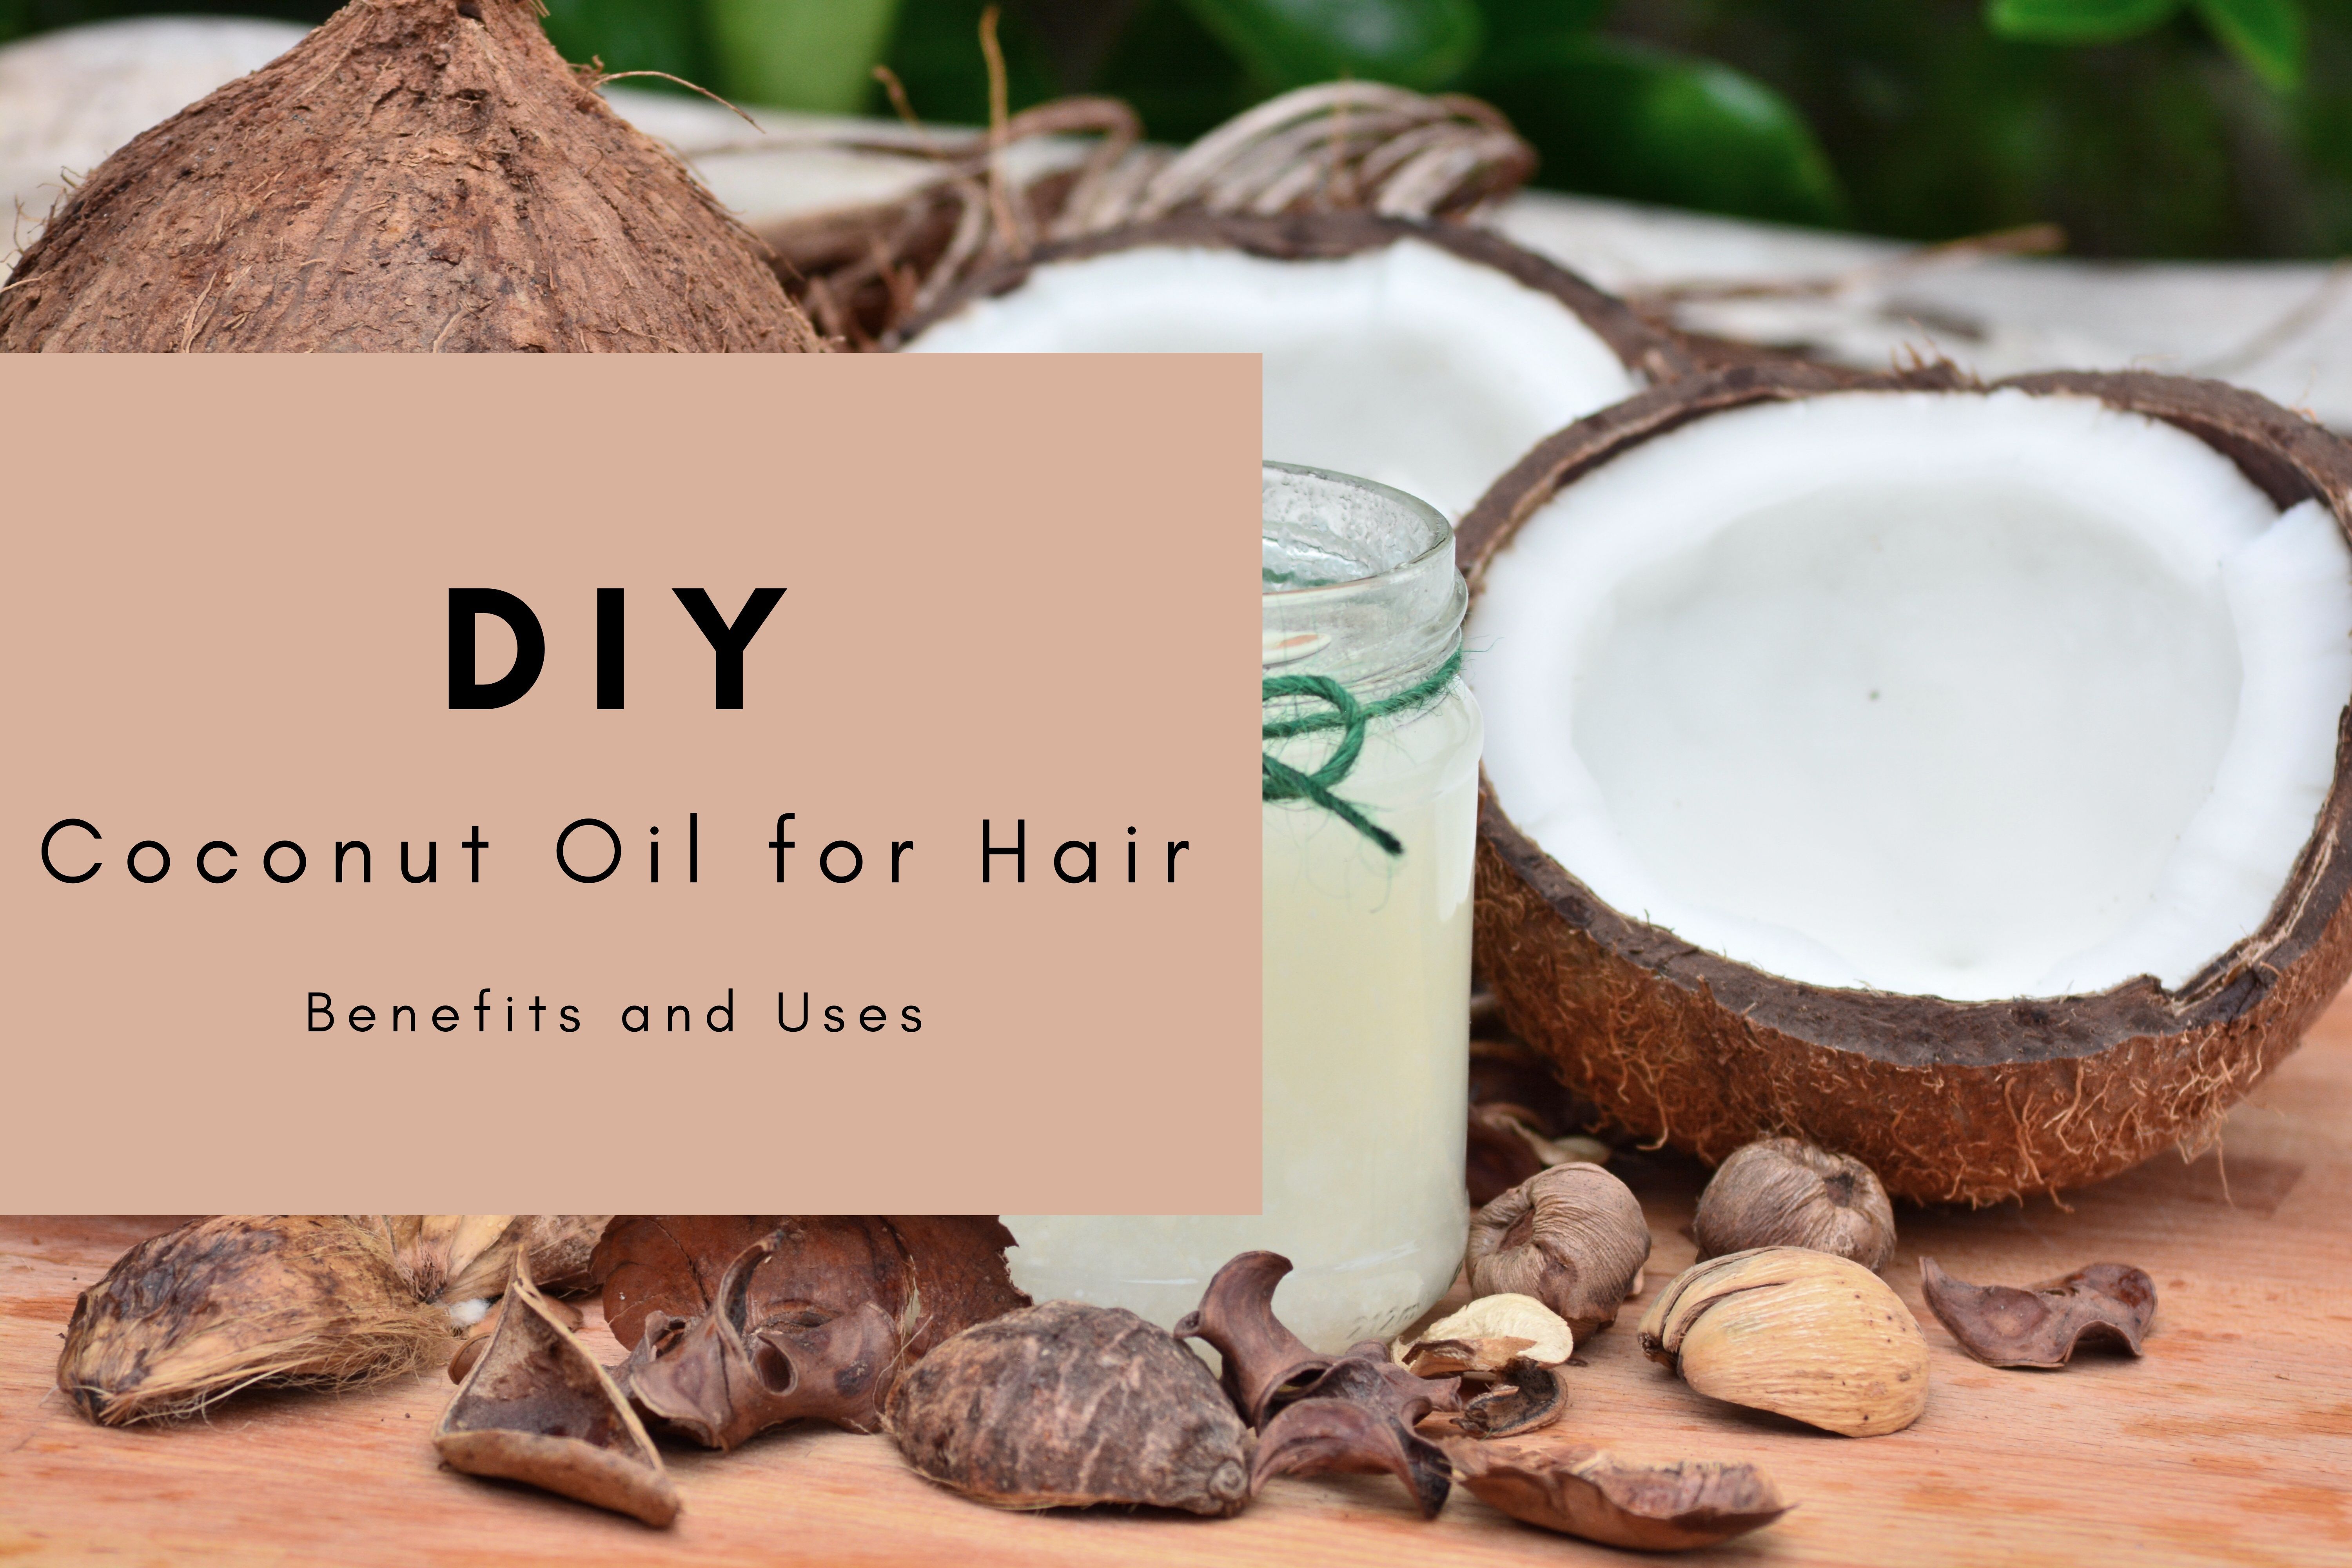 Coconut Oil for Hair: DIY Recipes, Benefits and Uses